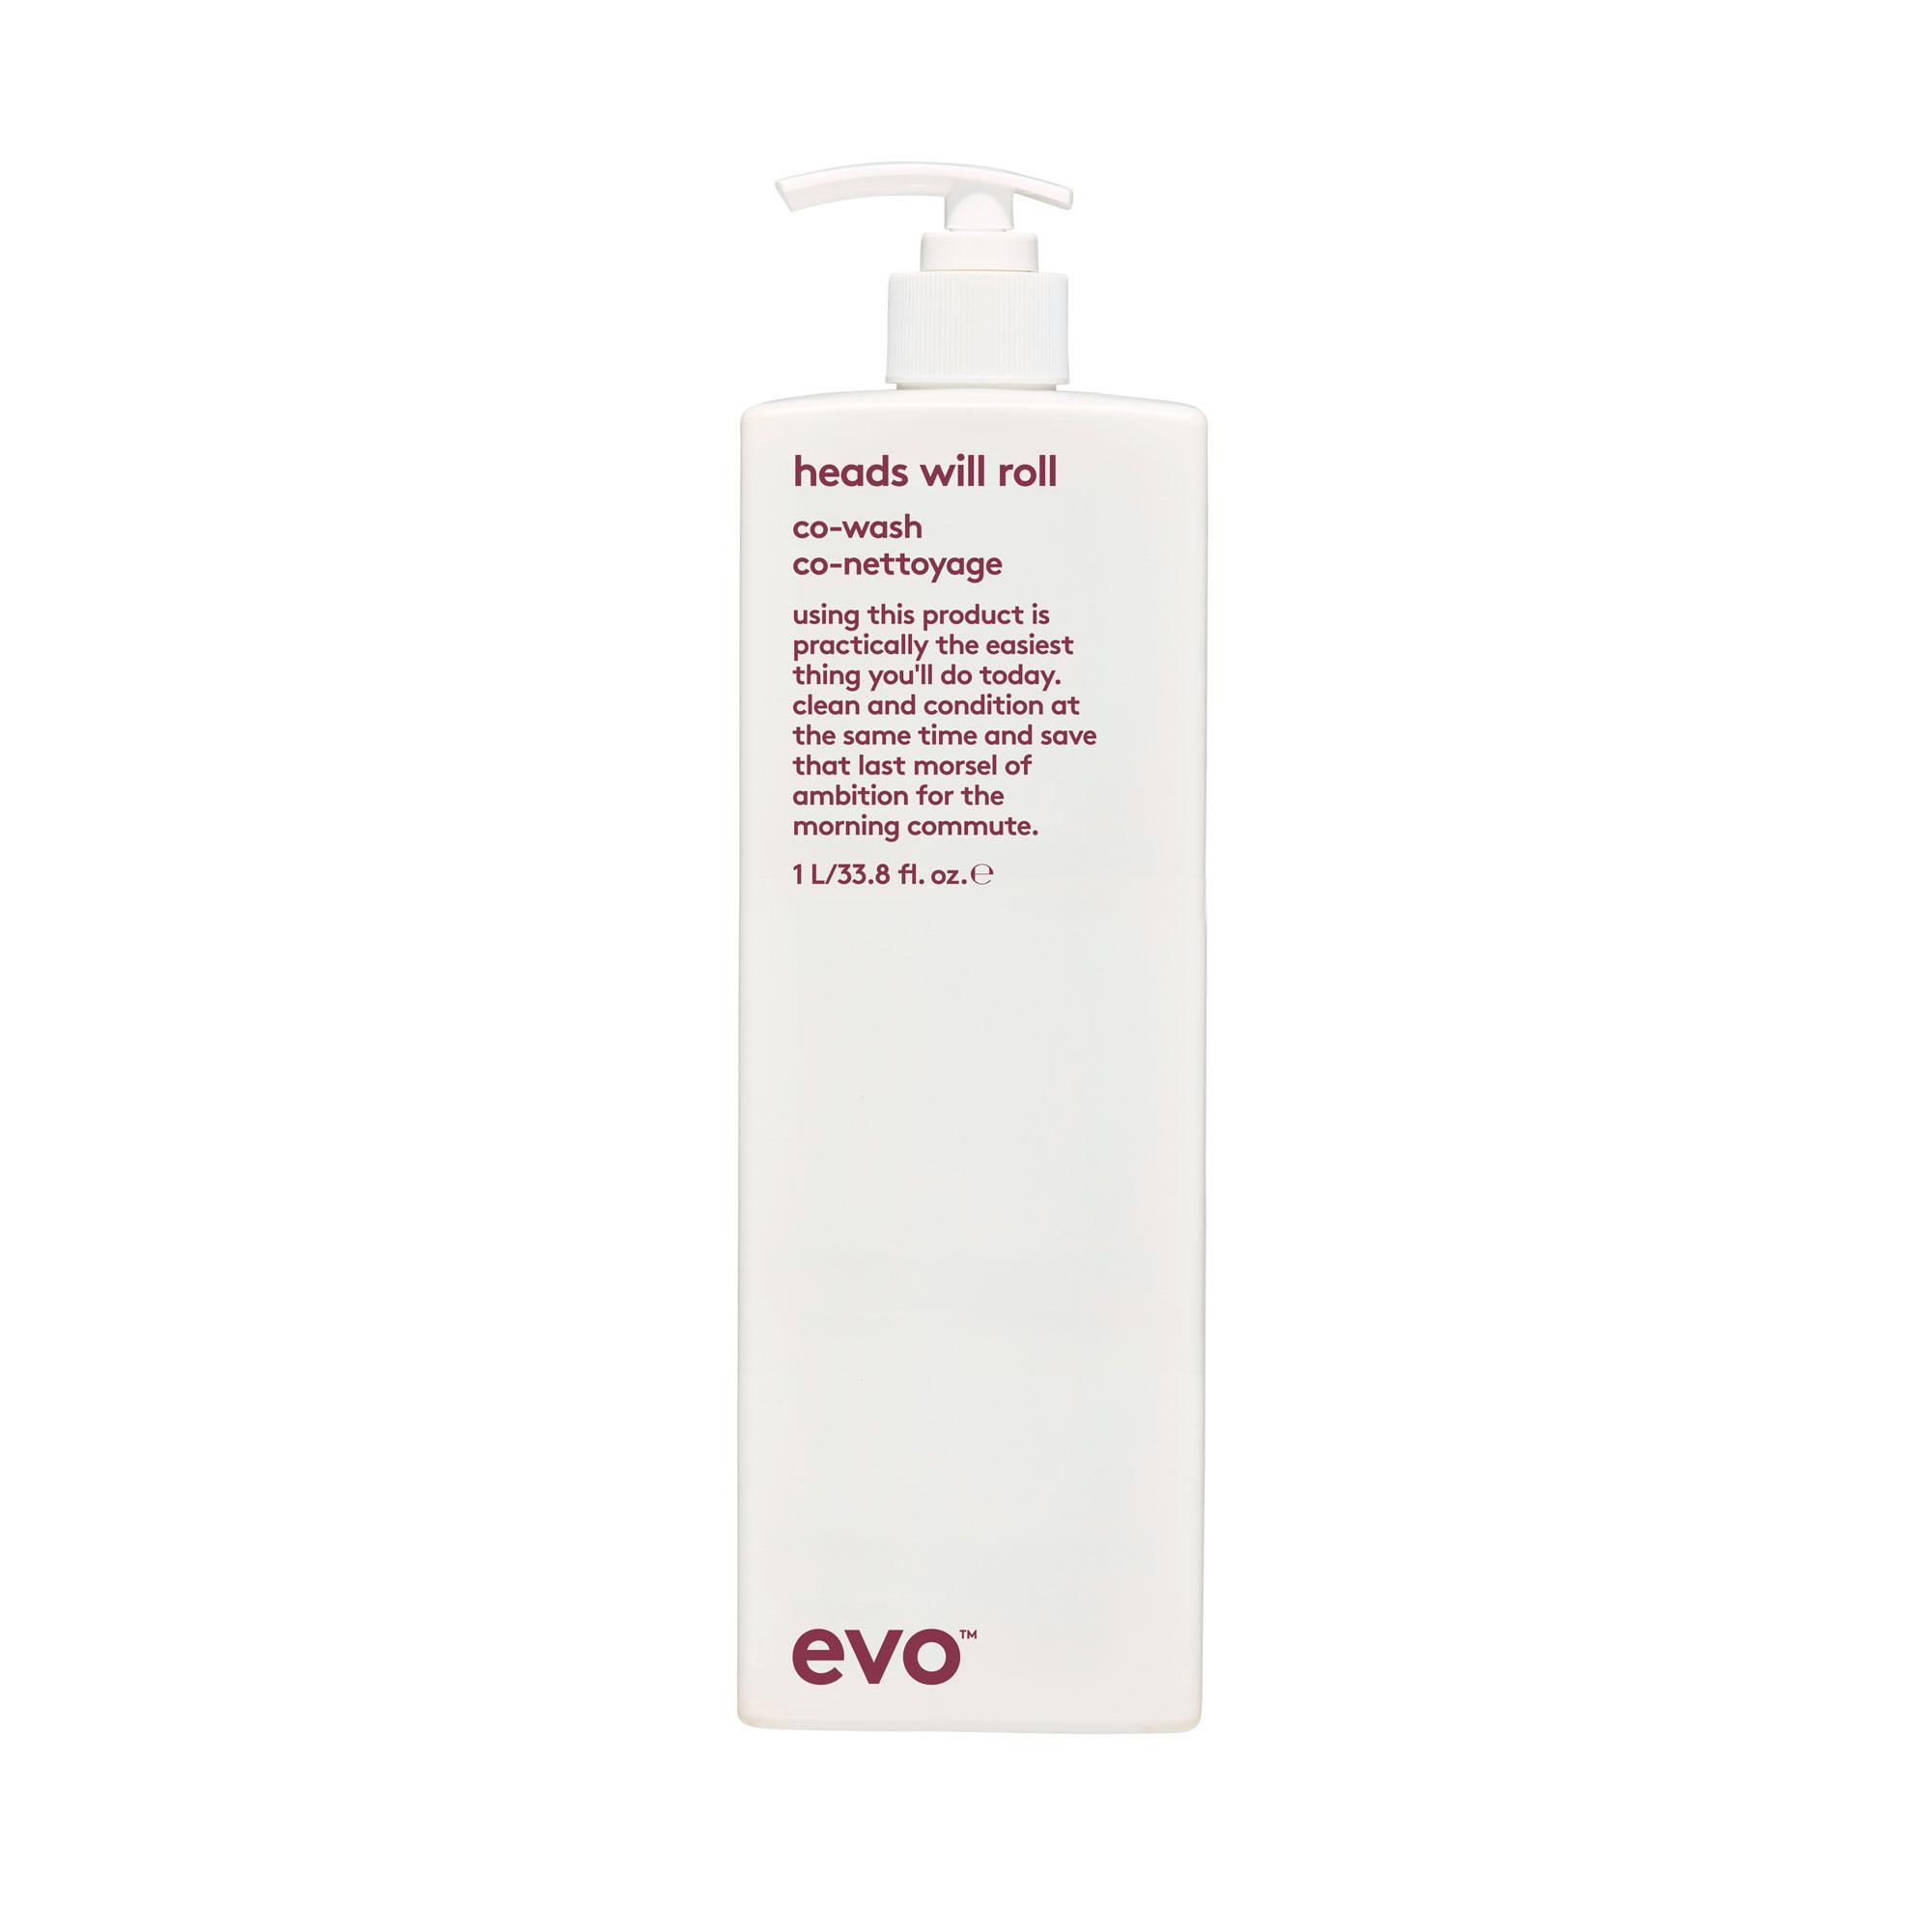 evo heads will roll cleansing conditioner